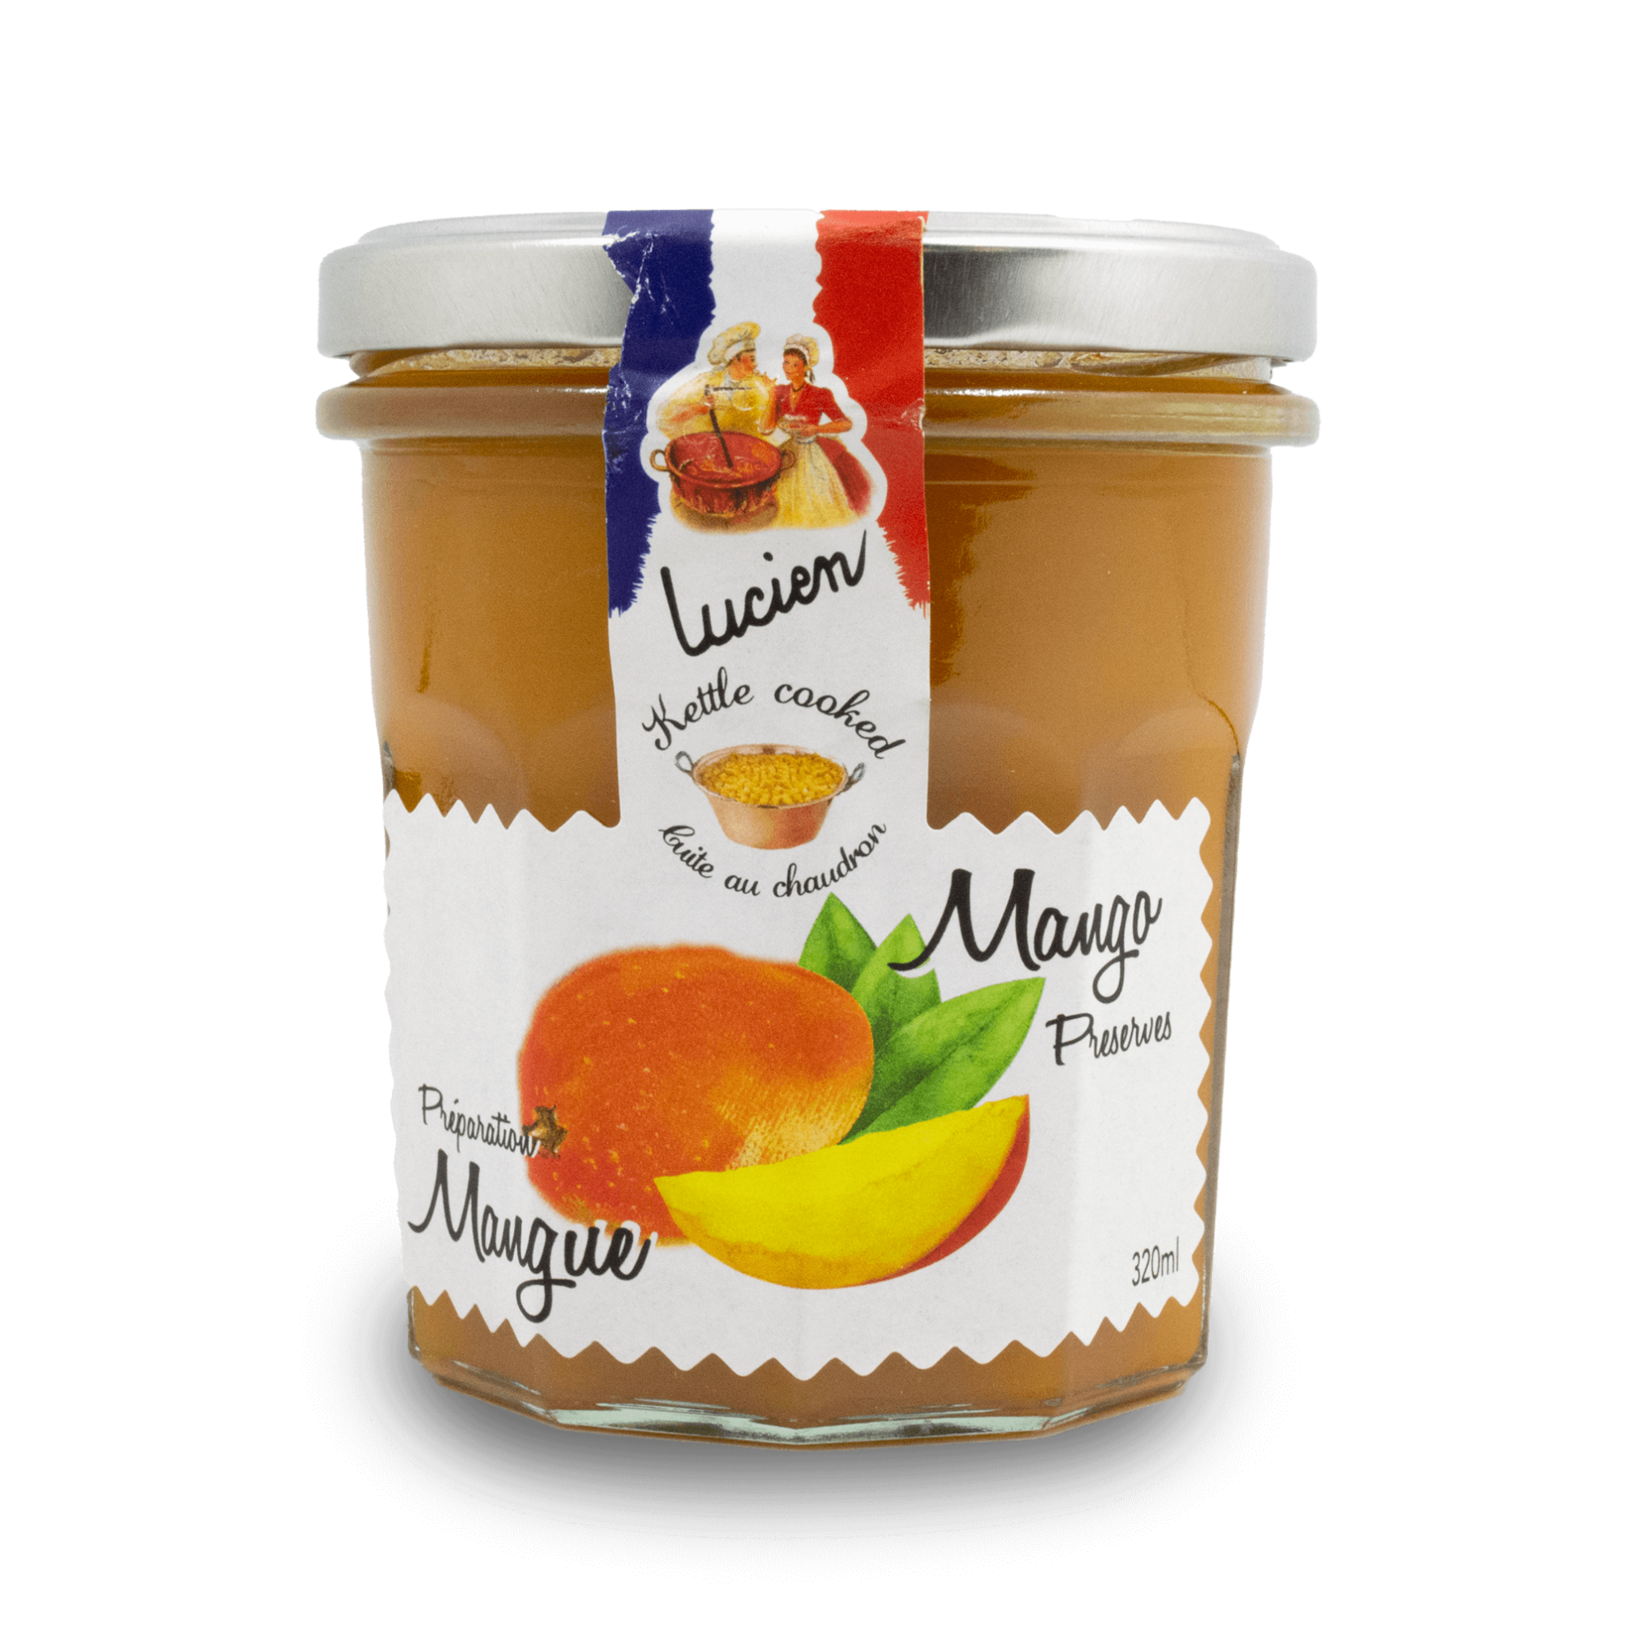 Lucien Lucien Kettle Cooked Jams - Mango 320ml